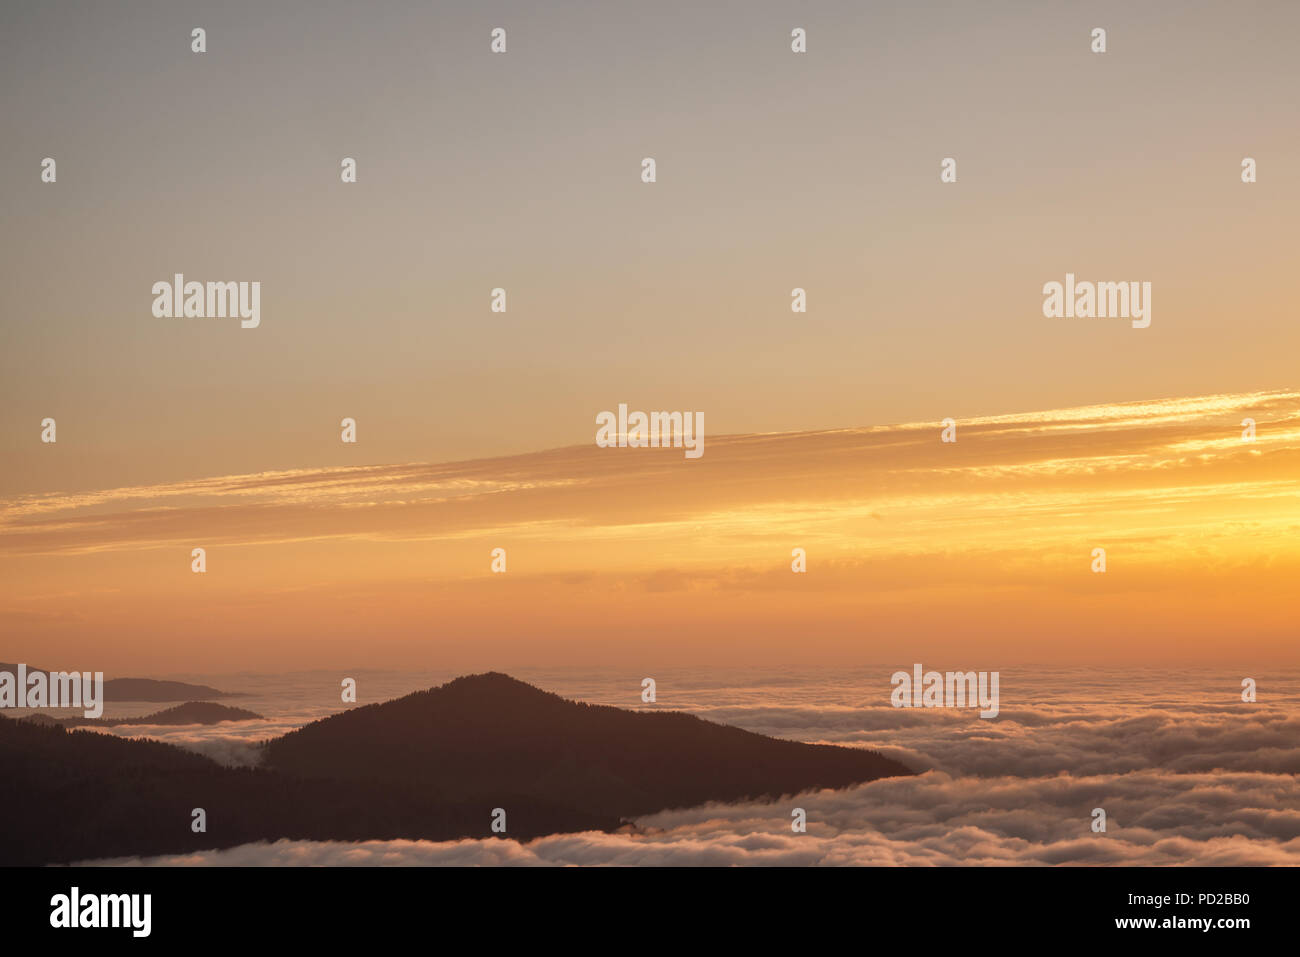 Mountain silhouette above the clouds at sunrise, view from the top view of mountains Stock Photo